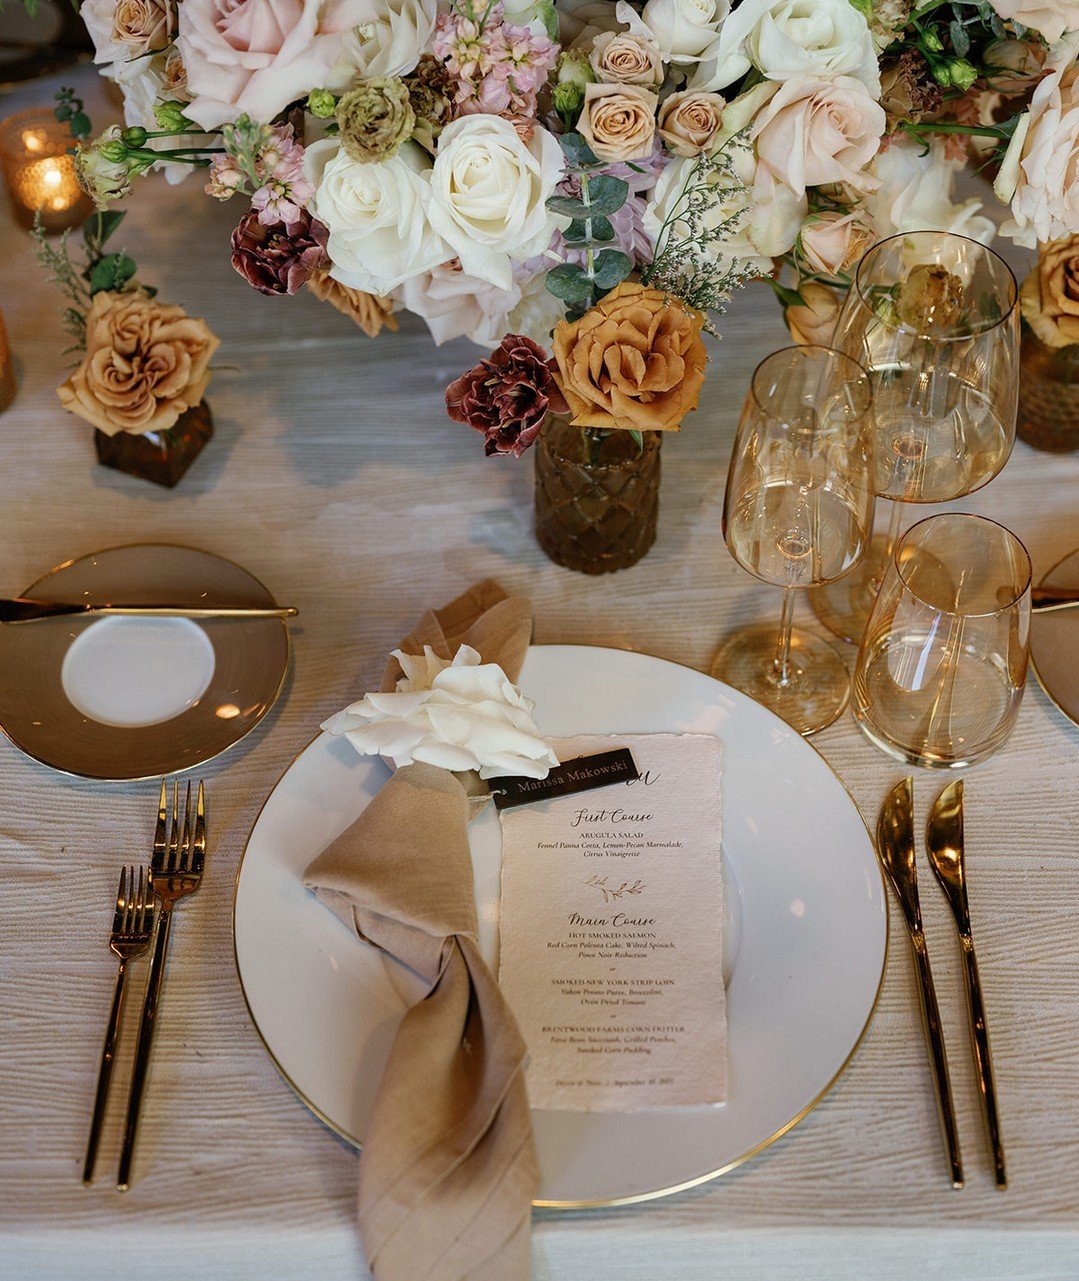 Casual elegance meets charming details with these hand-torn paper menus and foil-stamped leather place cards. A truly magnificent wedding!
#weddingstationery #menus #custompapergoods

📸 @jennyquicksall

Design + Planner: @pausmithgroup @kristeenlabr